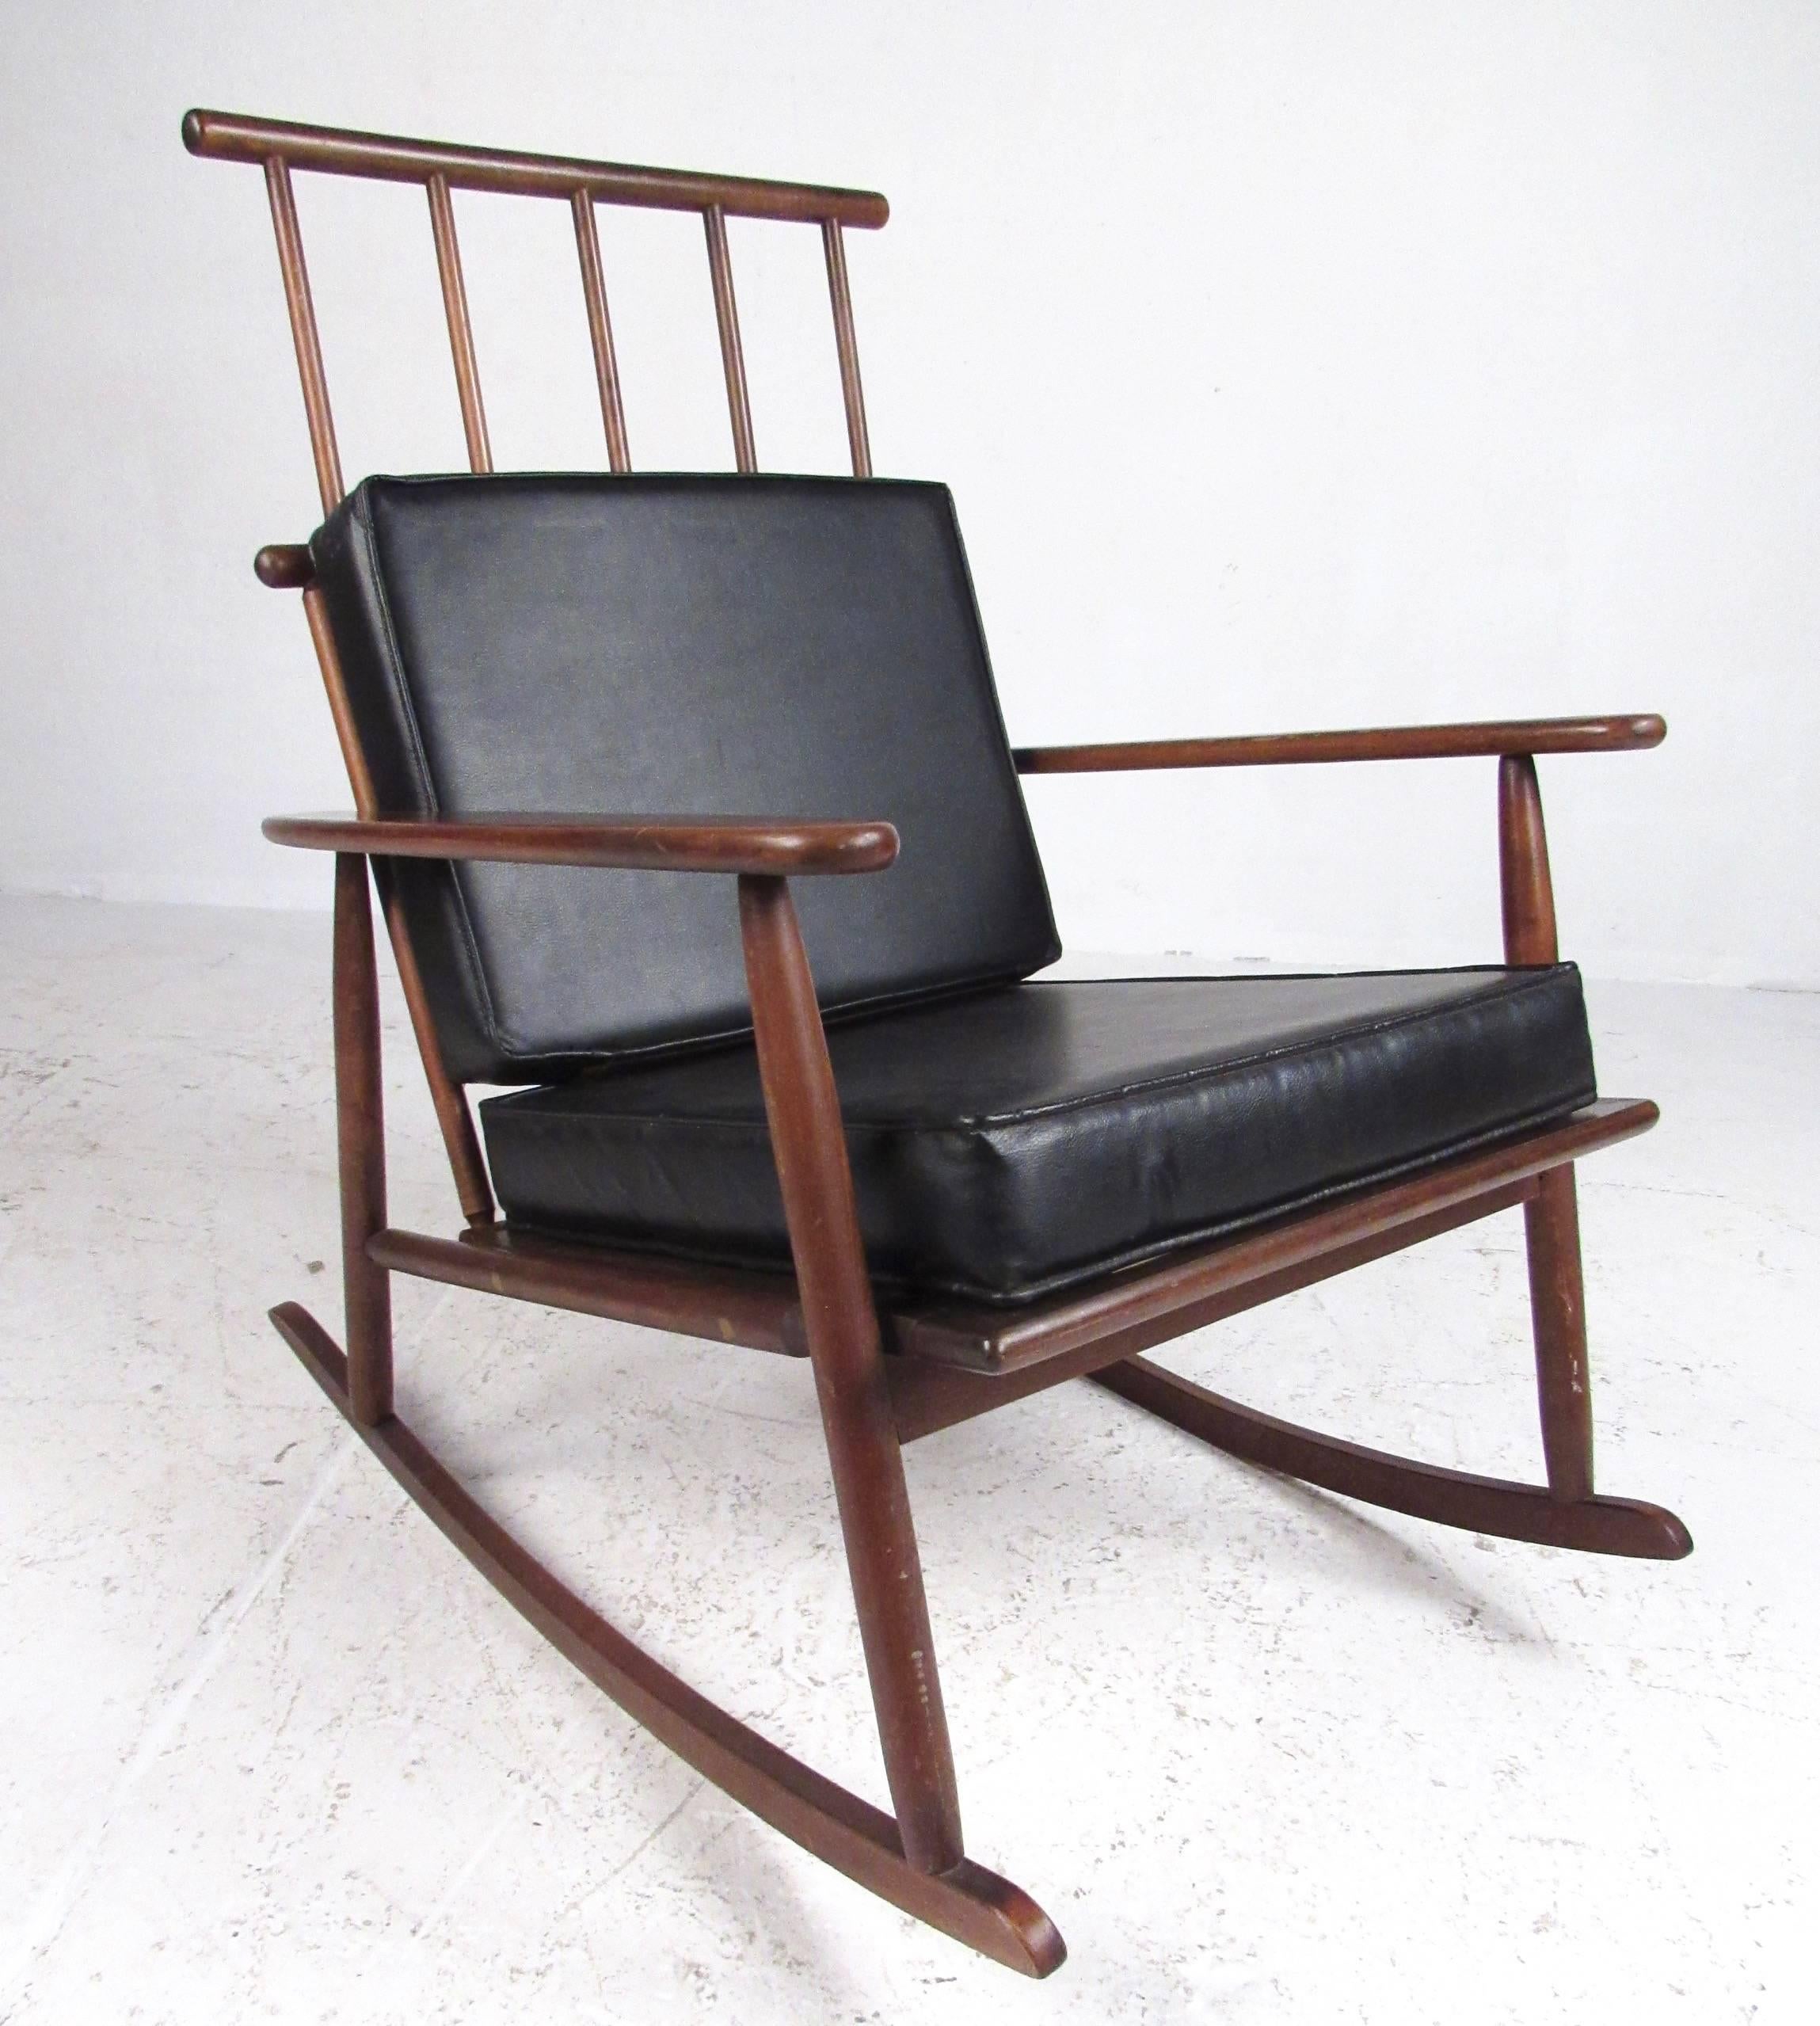 The unique Danish modern design of this midcentury rocking chair makes a striking addition to home or business seating area. Sculptural spoke seat back adds to the distinctive Scandinavian appeal of the rocker. Removable cushions for added comfort,